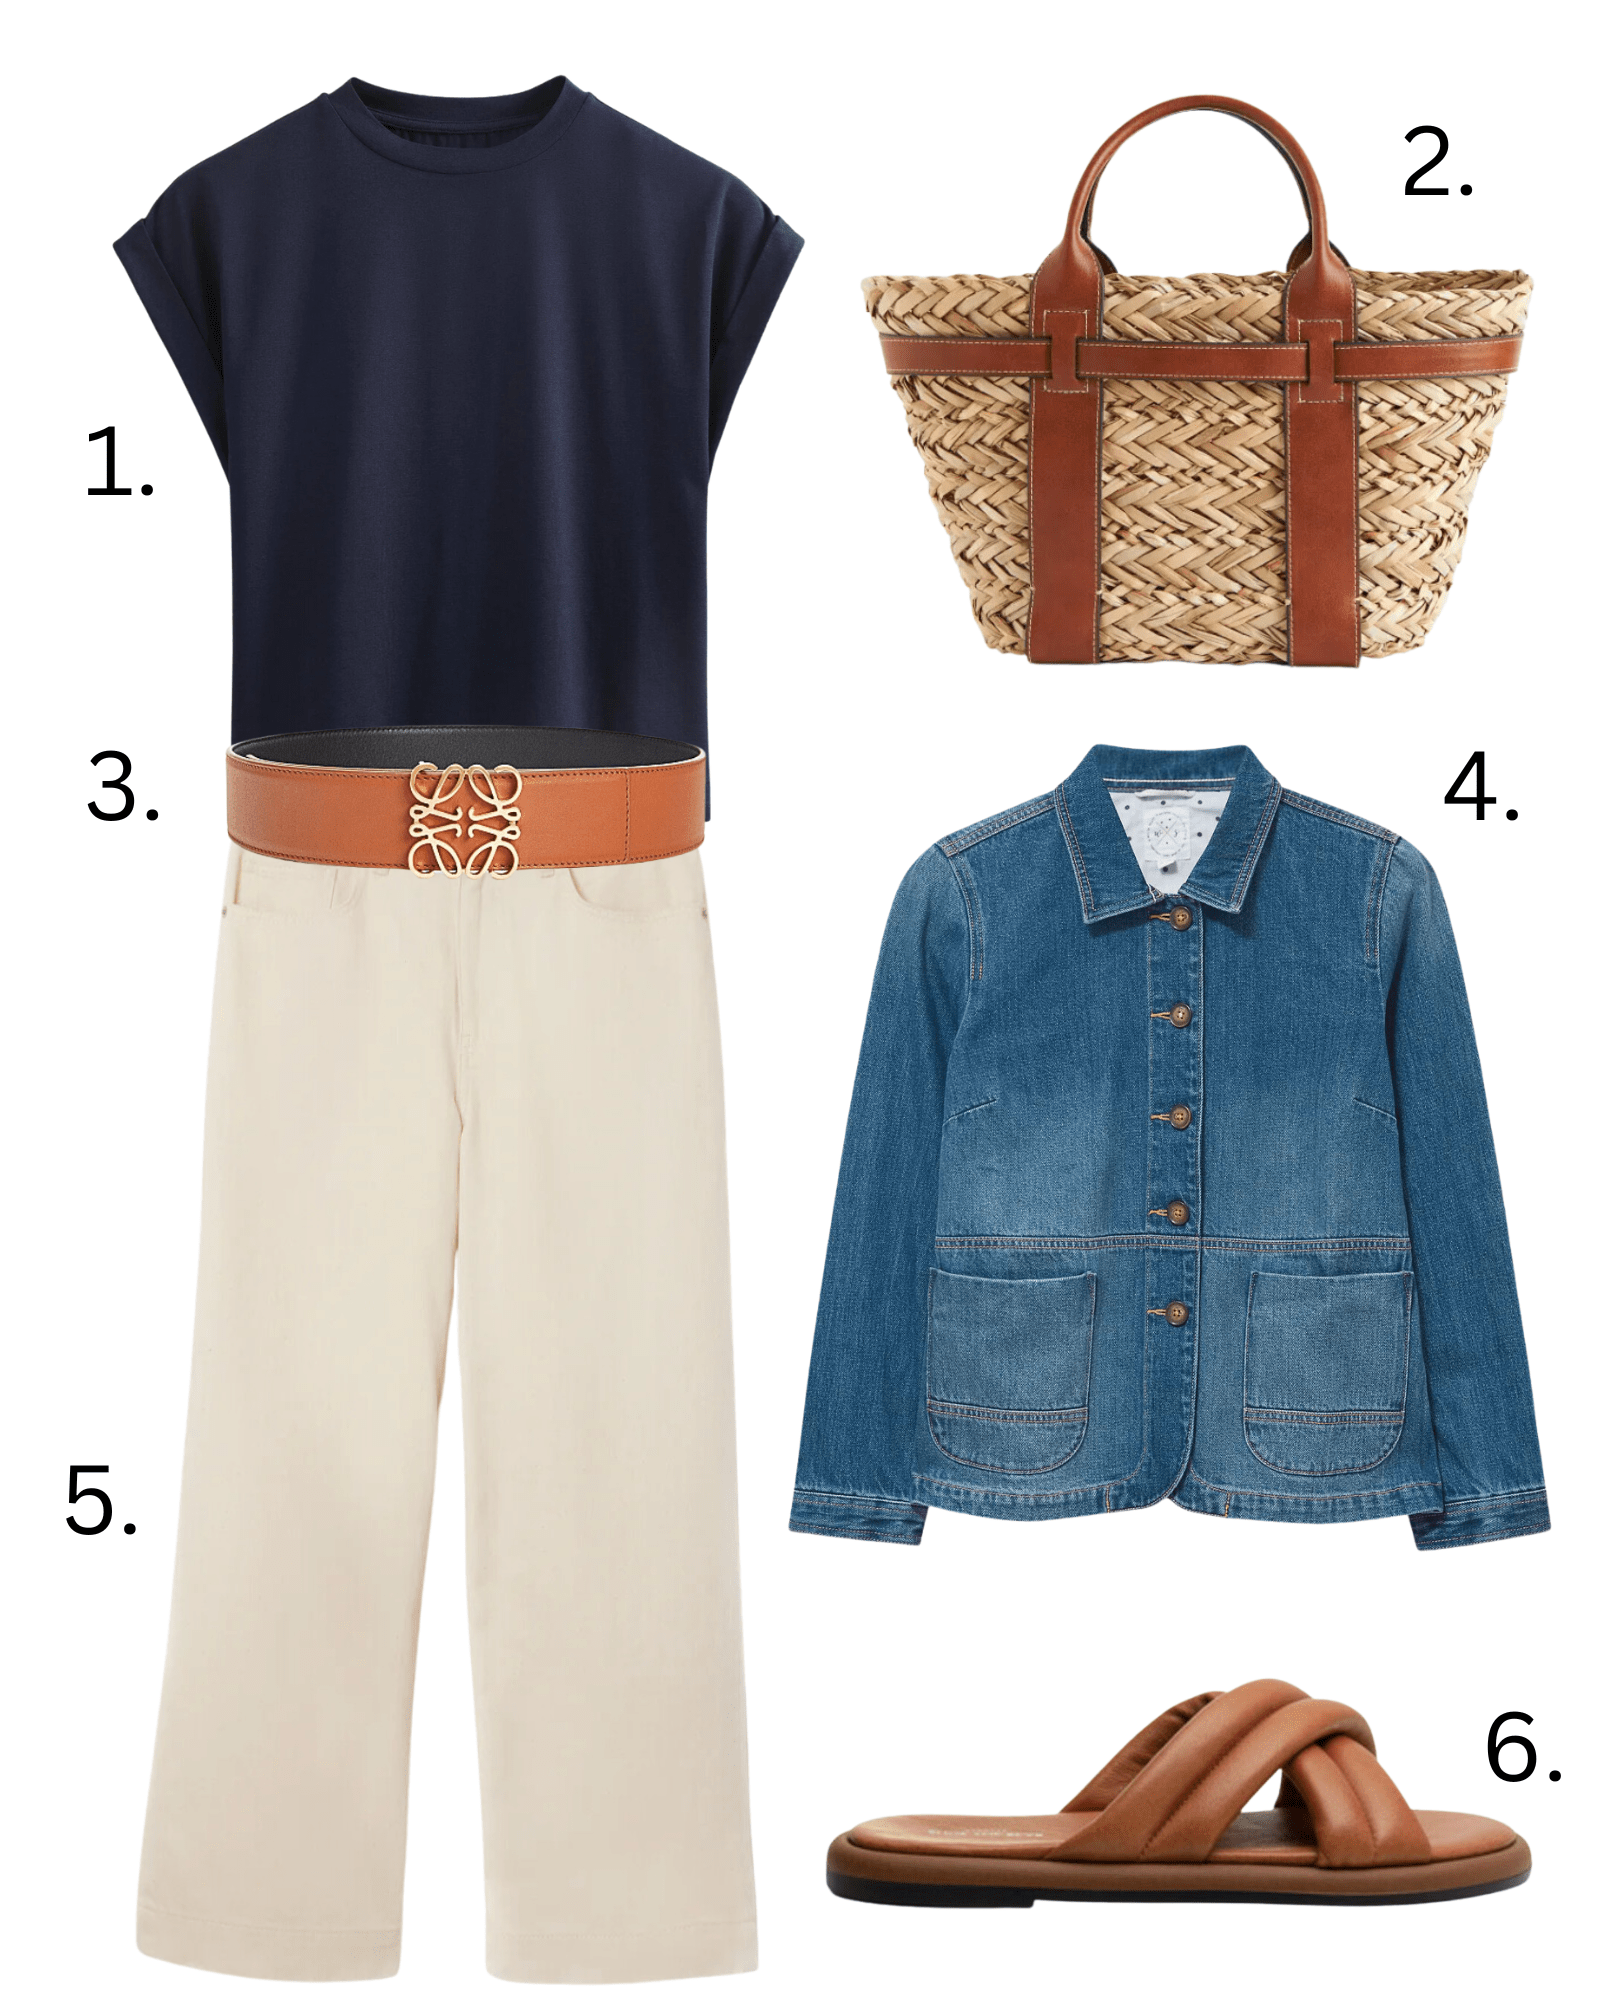 Six outfit ideas for right now